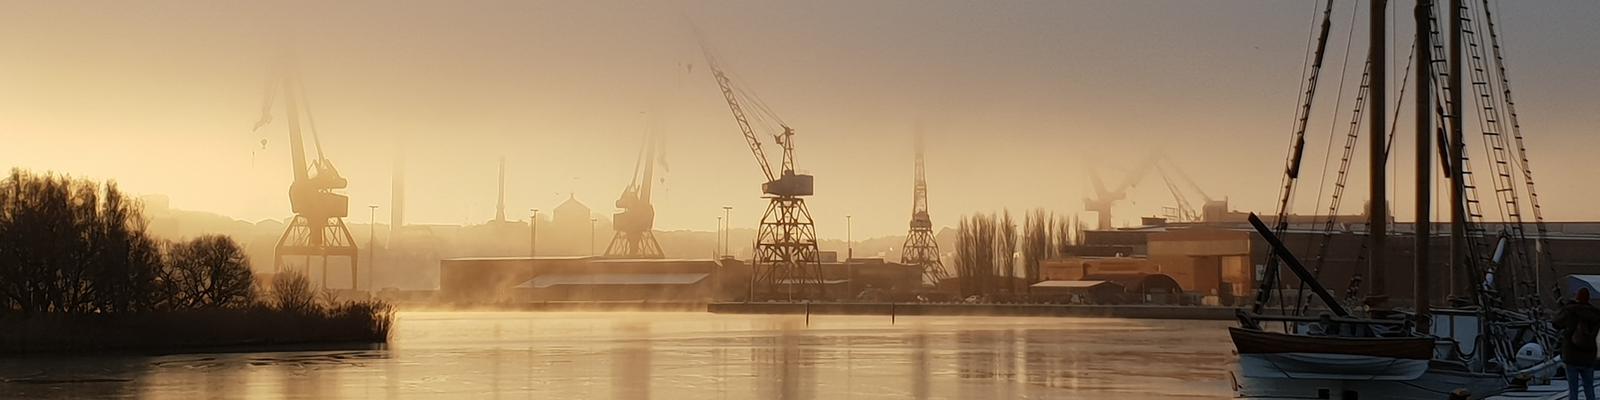 View of a harbor in Gothenburg at dawn